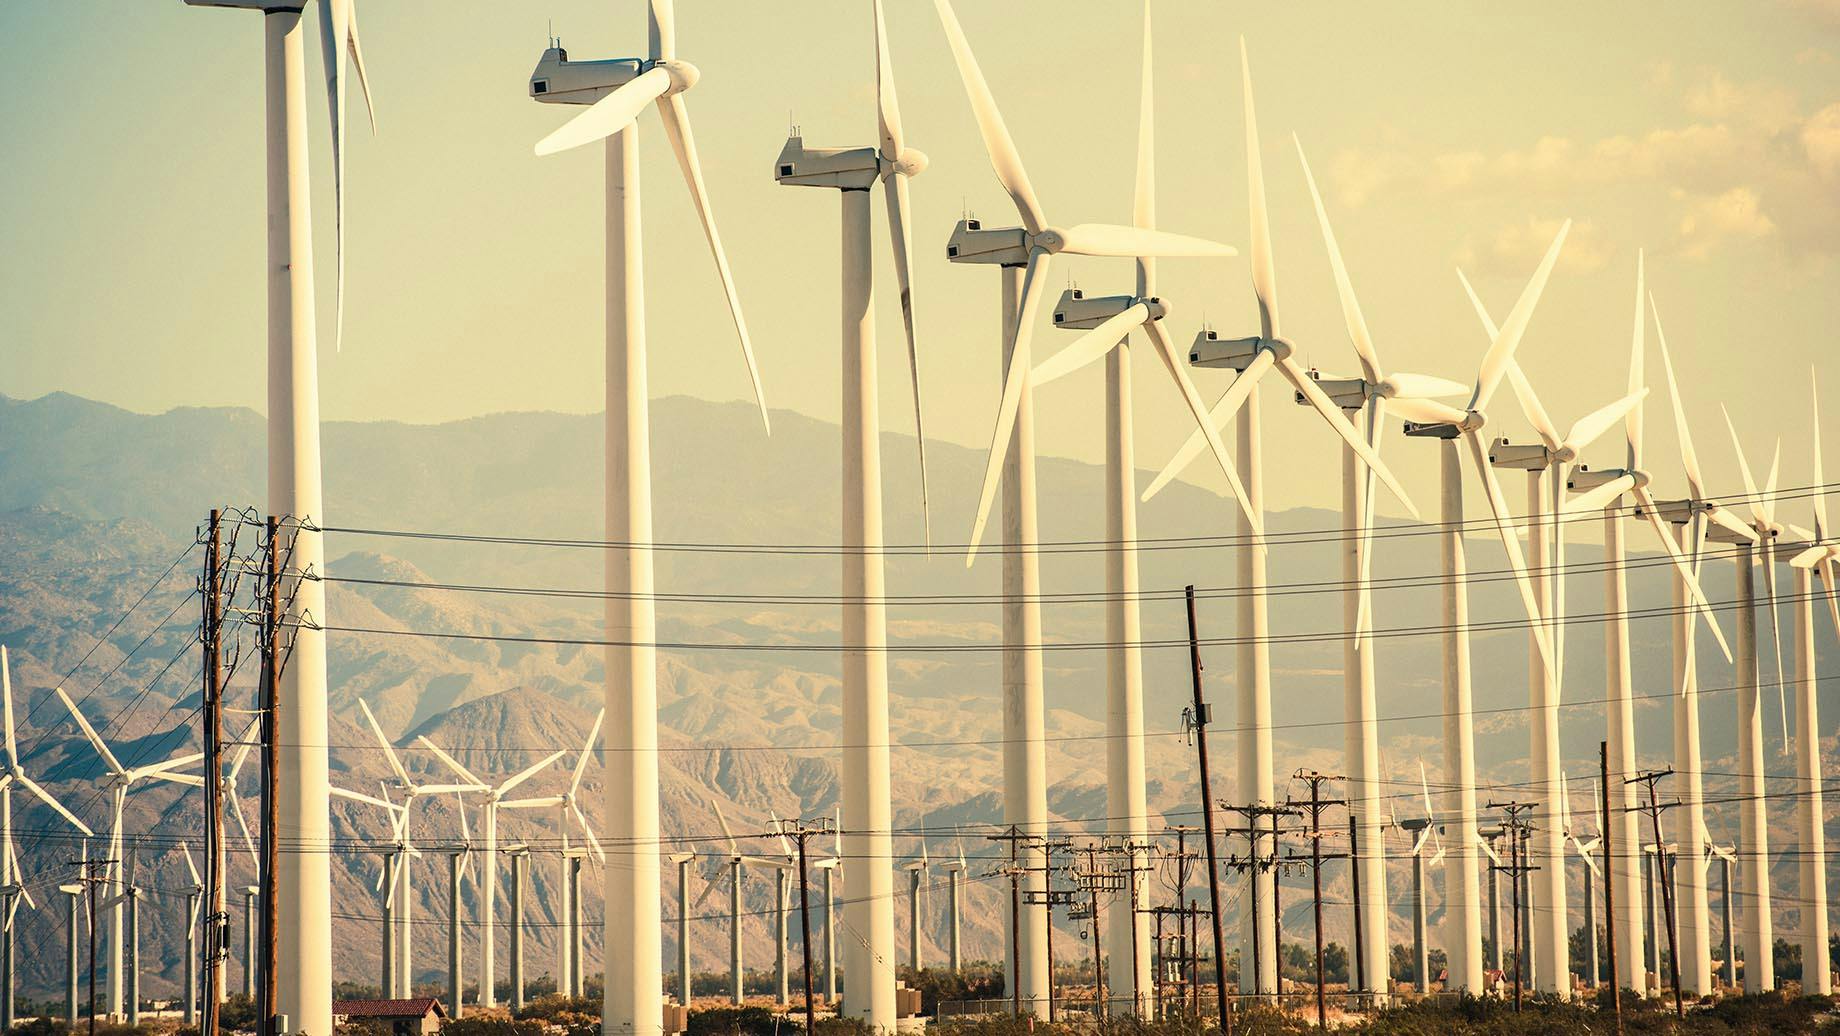 Brazil is already the fifth country that generates wind energy